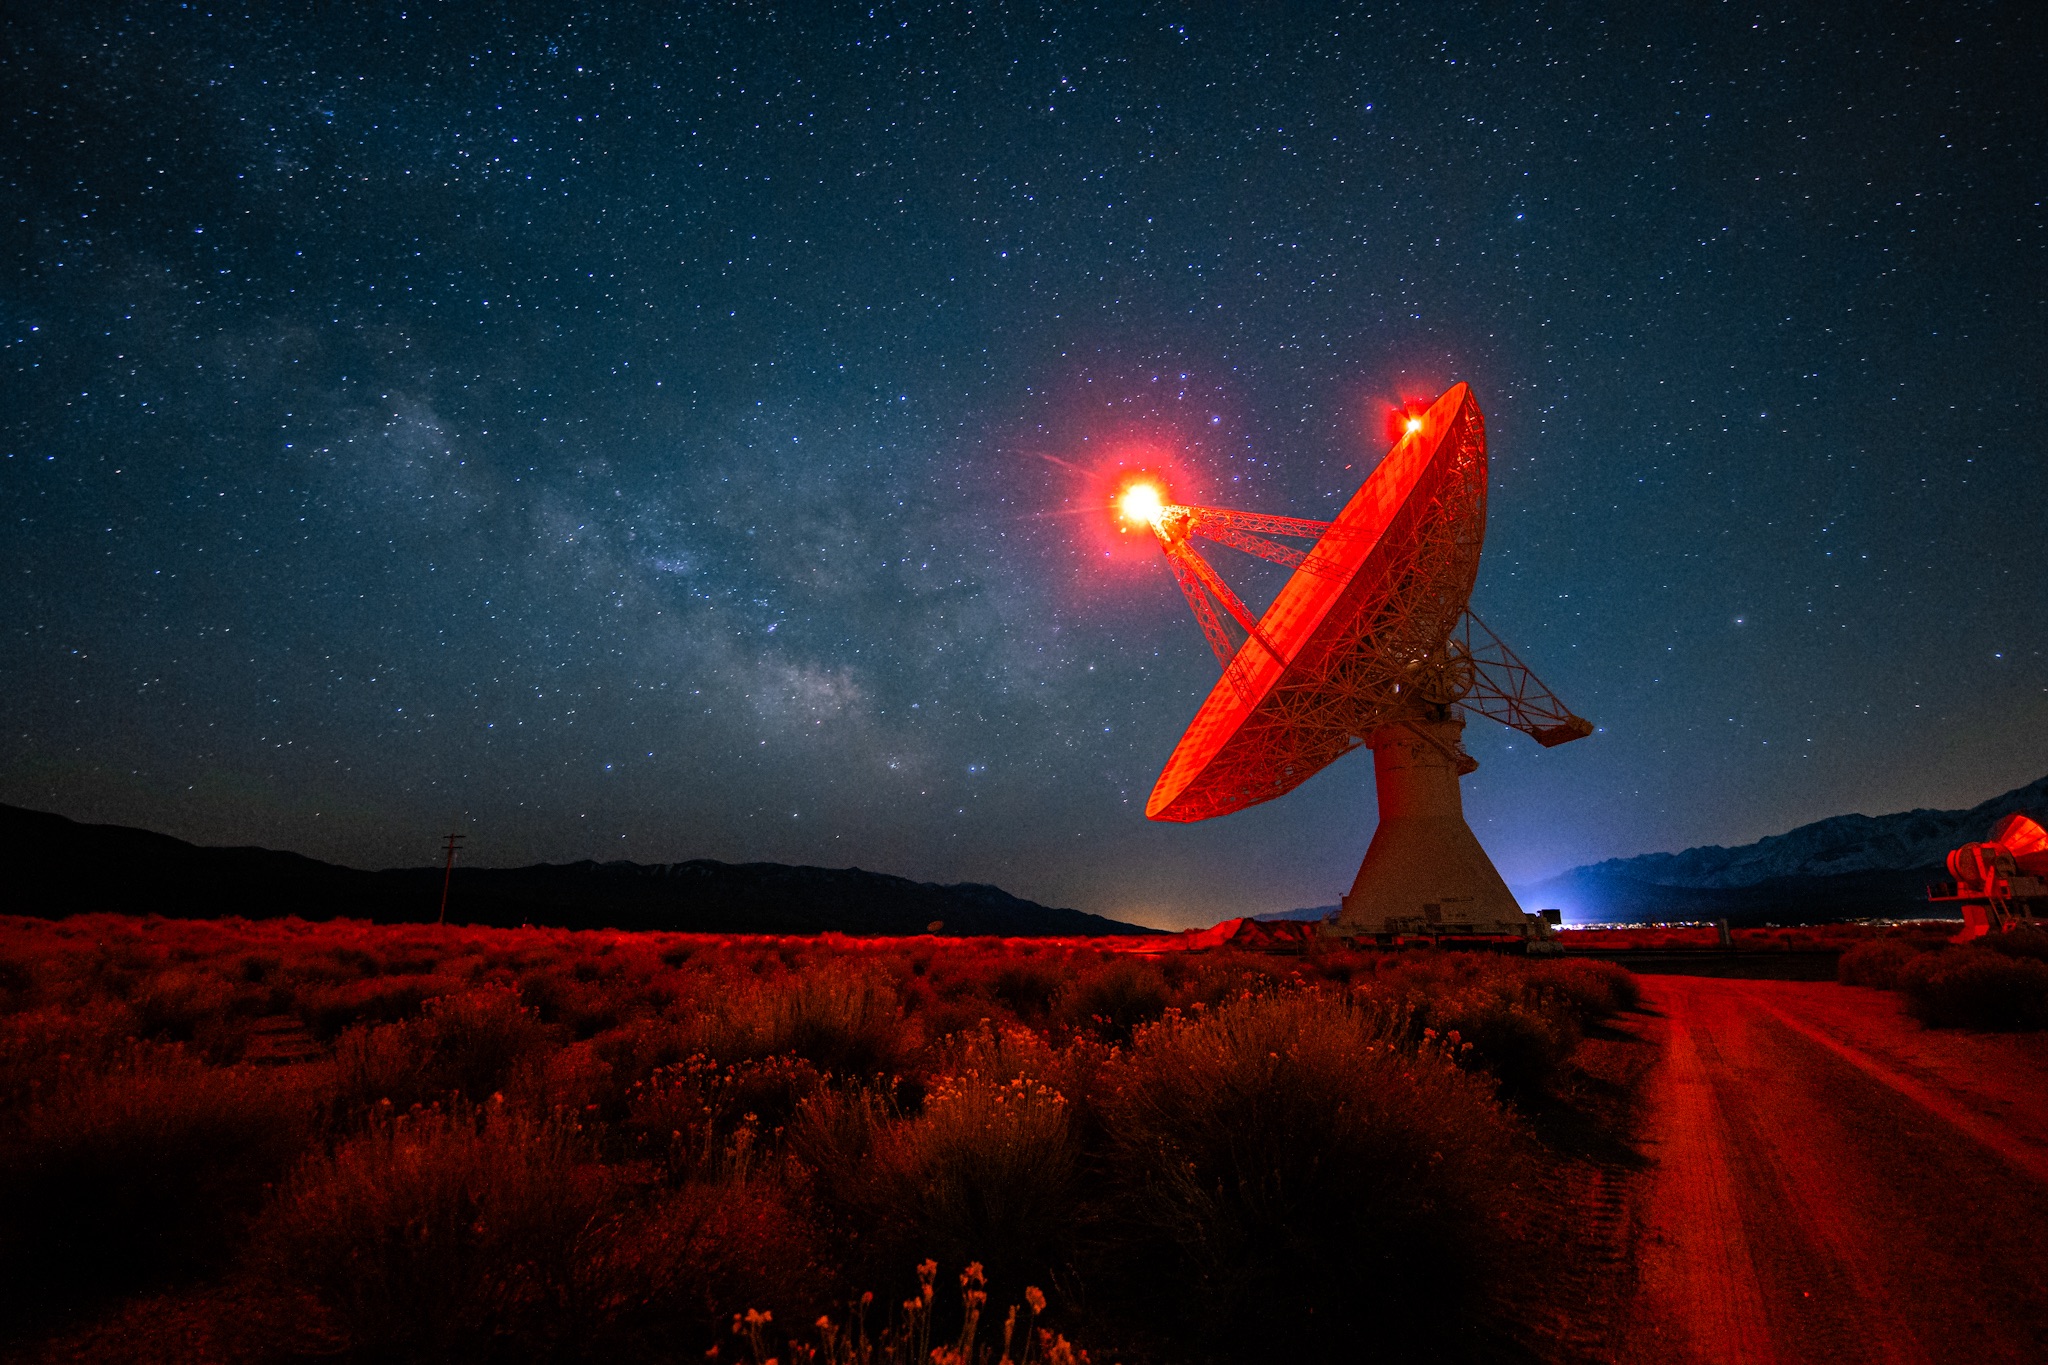 Community photo by Ross Stone | Owens Valley Radio Observatory (OVRO)